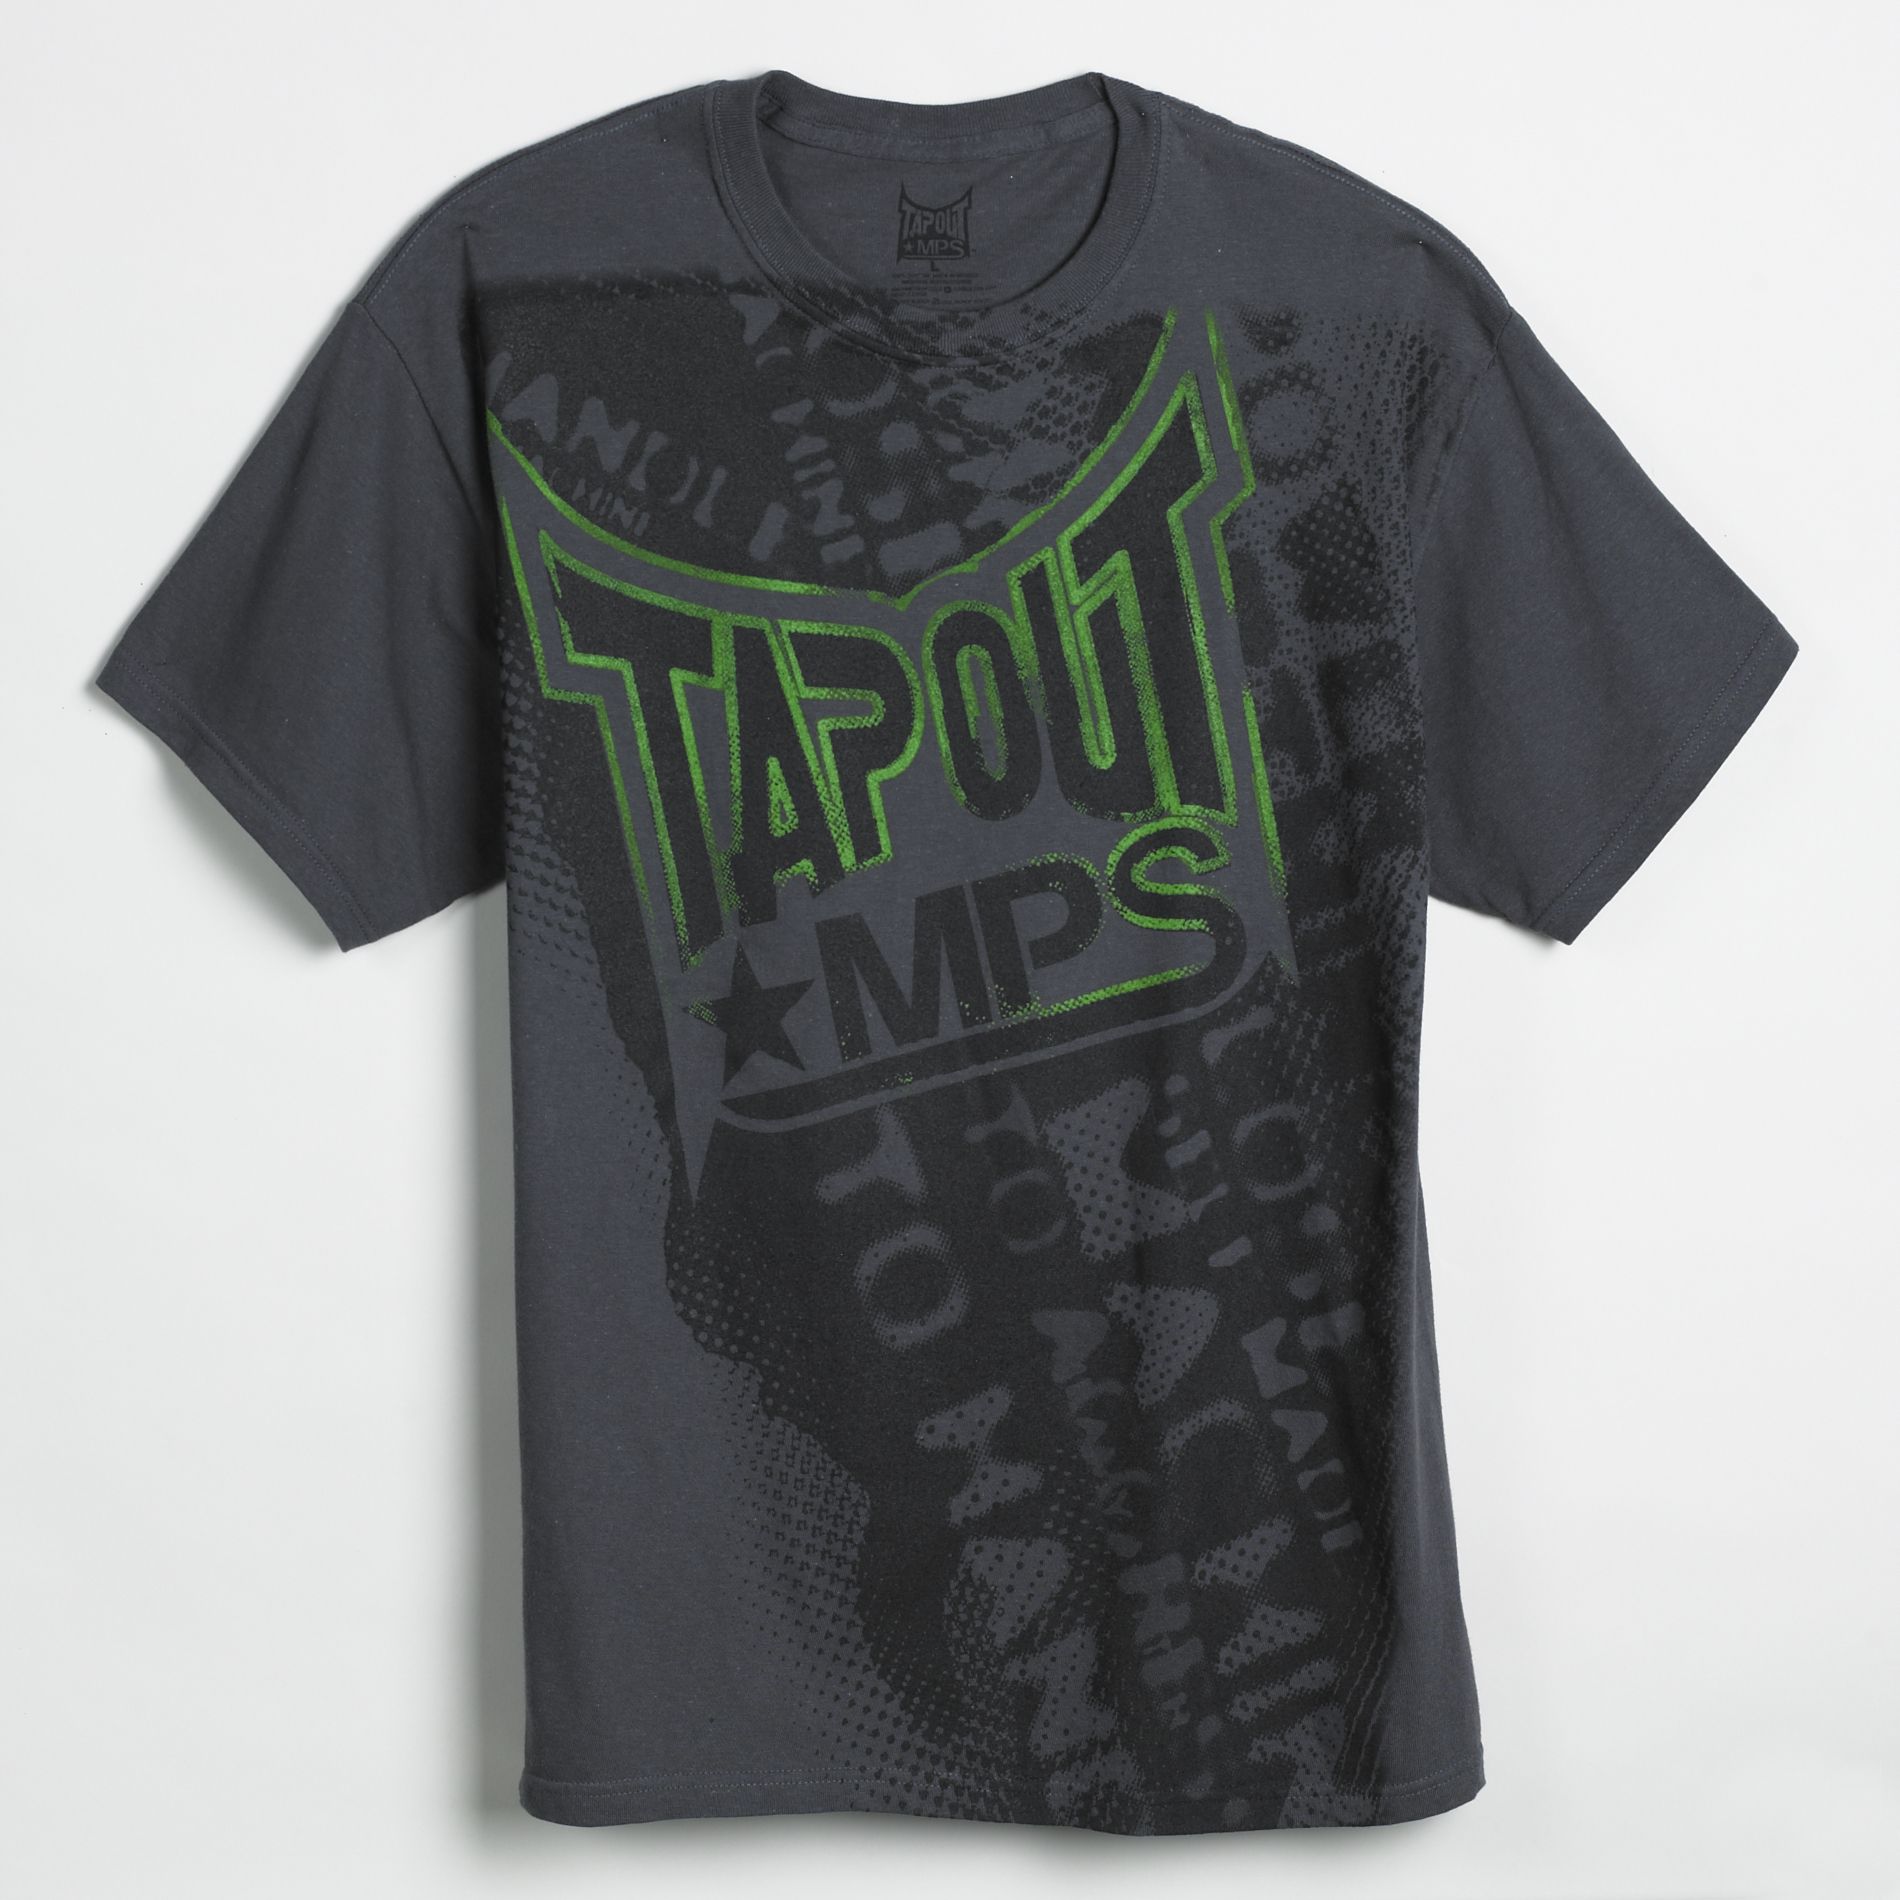 TapouT Young Men's Screen Tee